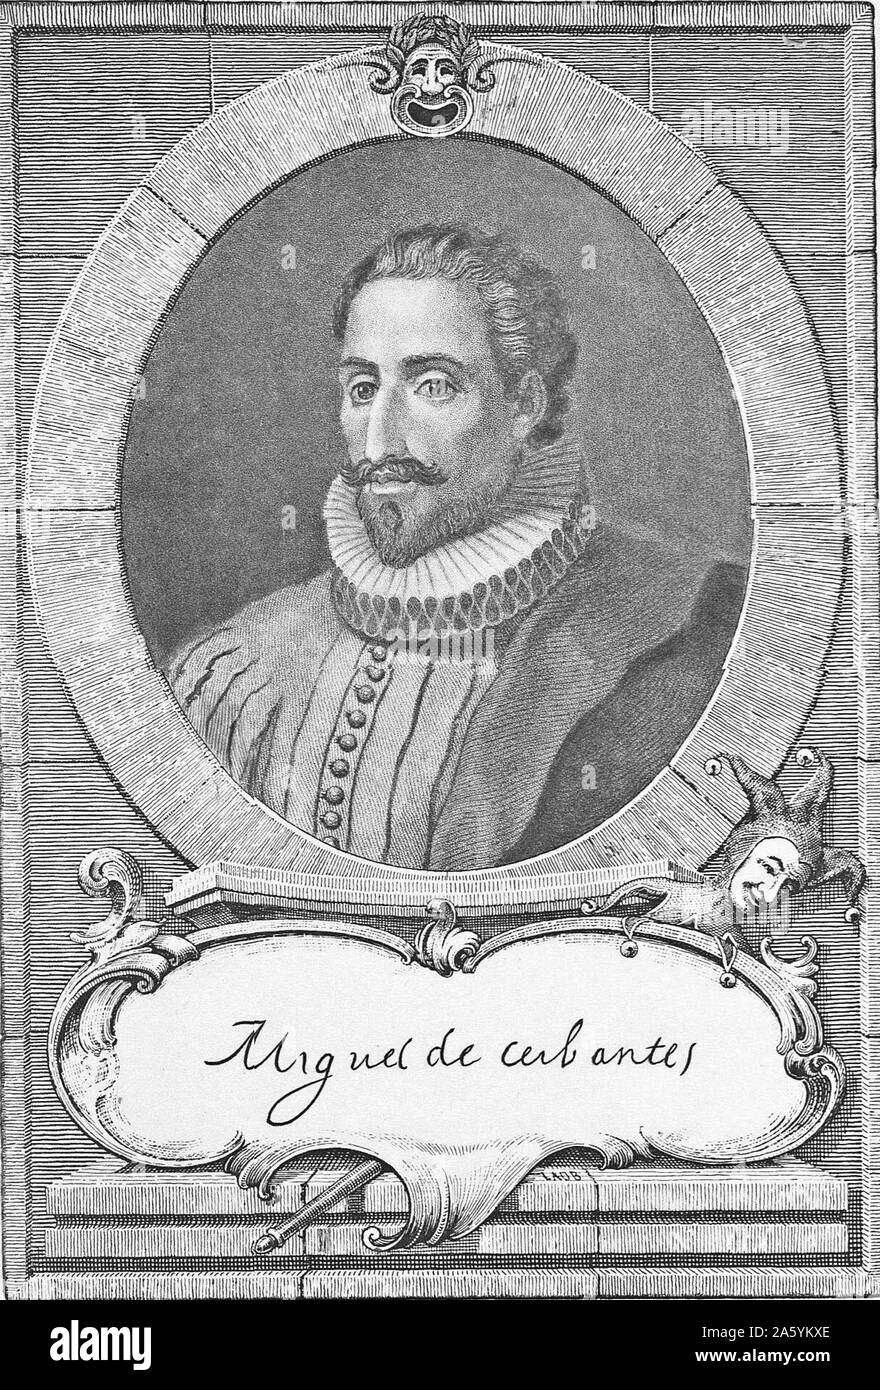 Miguel de Cervantes, Spanish novelist, poet, and playwright. His magnum opus Don Quixote  is considered the first modern novel. 19th century Engraving Stock Photo